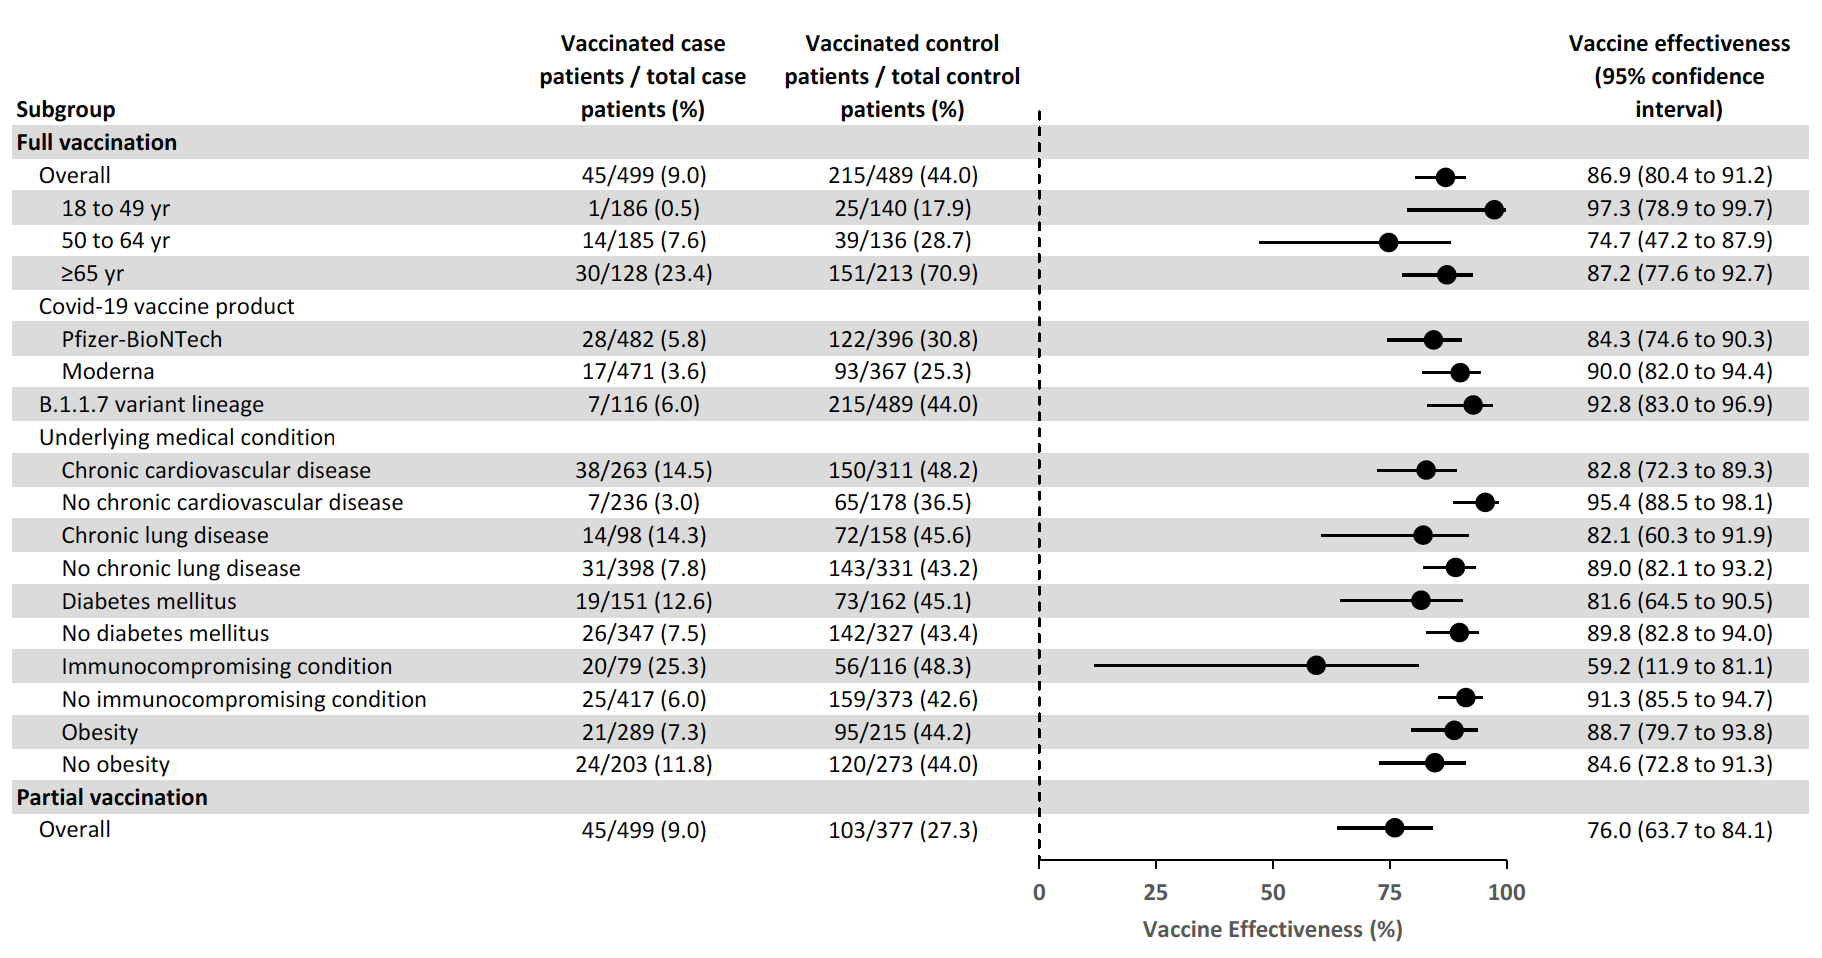 Table showing vaccine effectiveness by subgroups